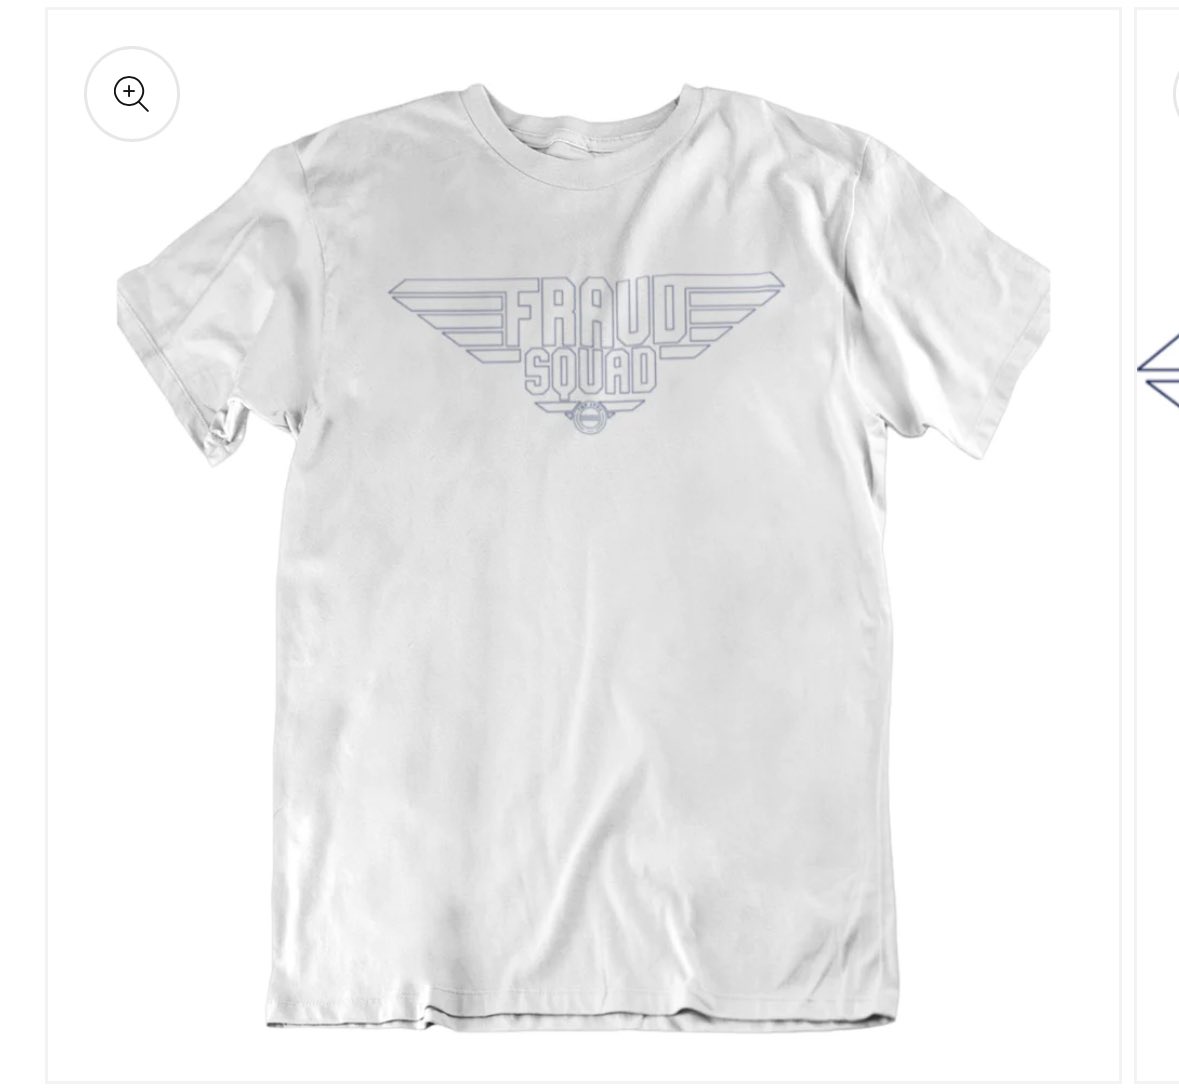 Want to lean into the “Fraud Squad” nickname? While incorporating it into your Whiteout day apparel? #GoJetsGo